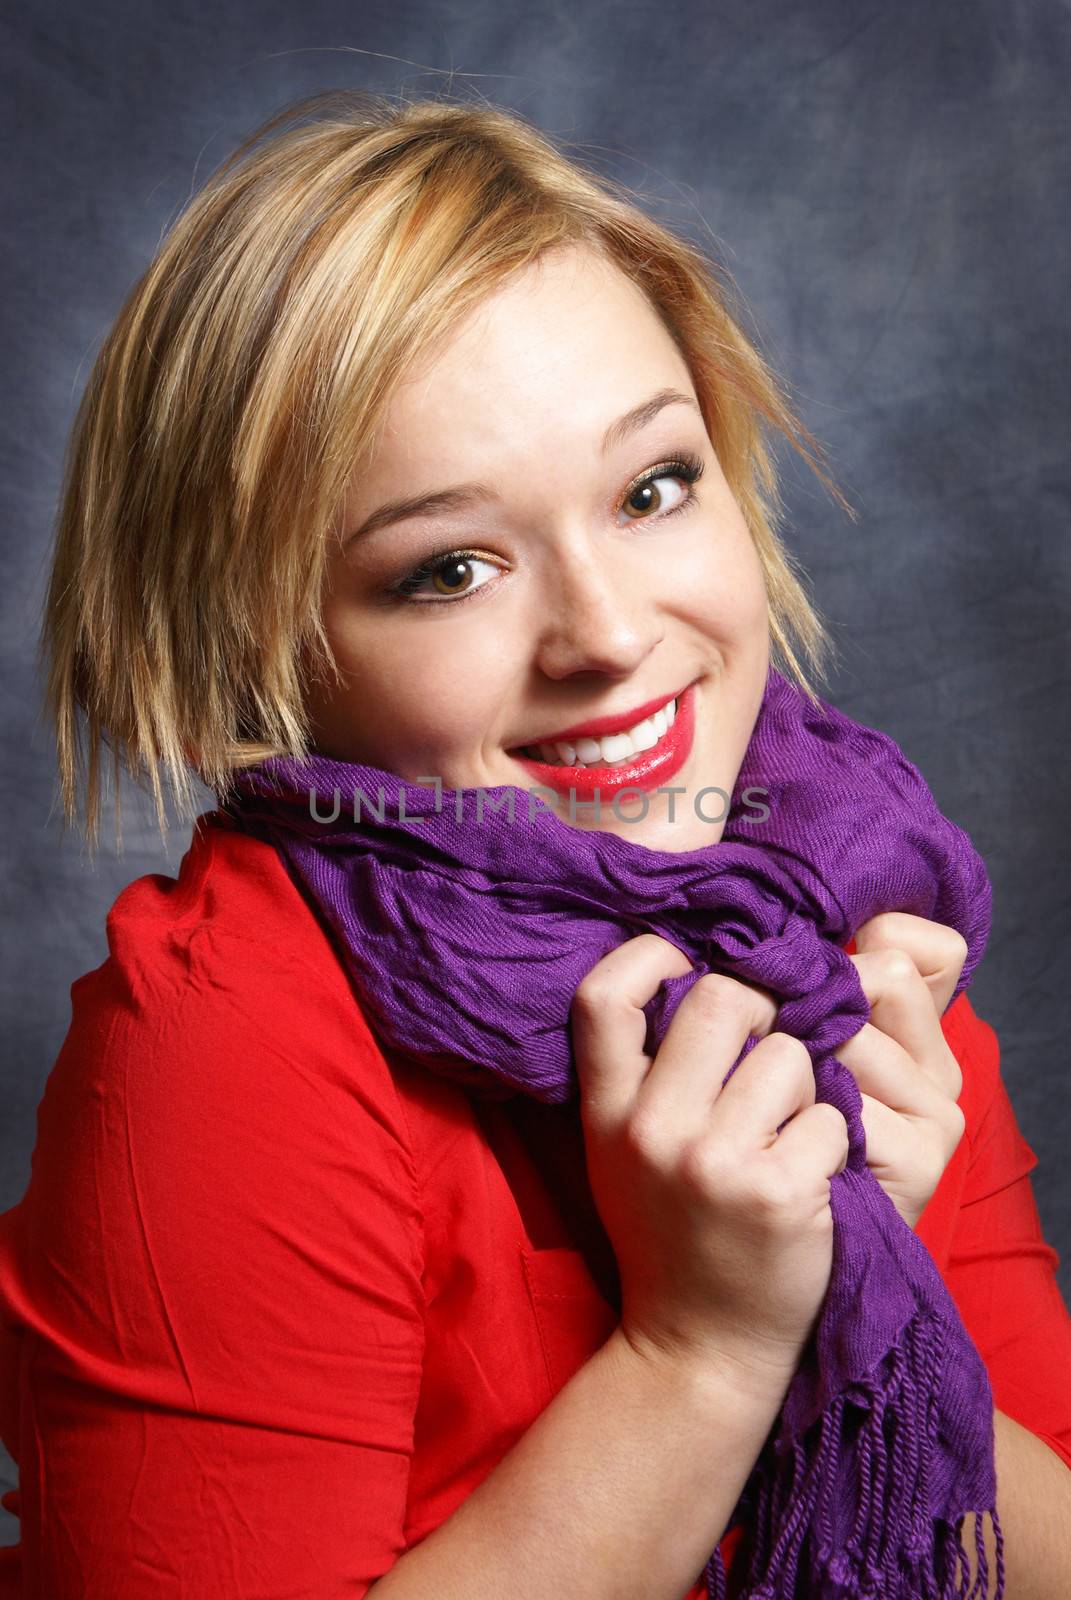 A young woman scrunches her scarf in a warm fashionable pose.